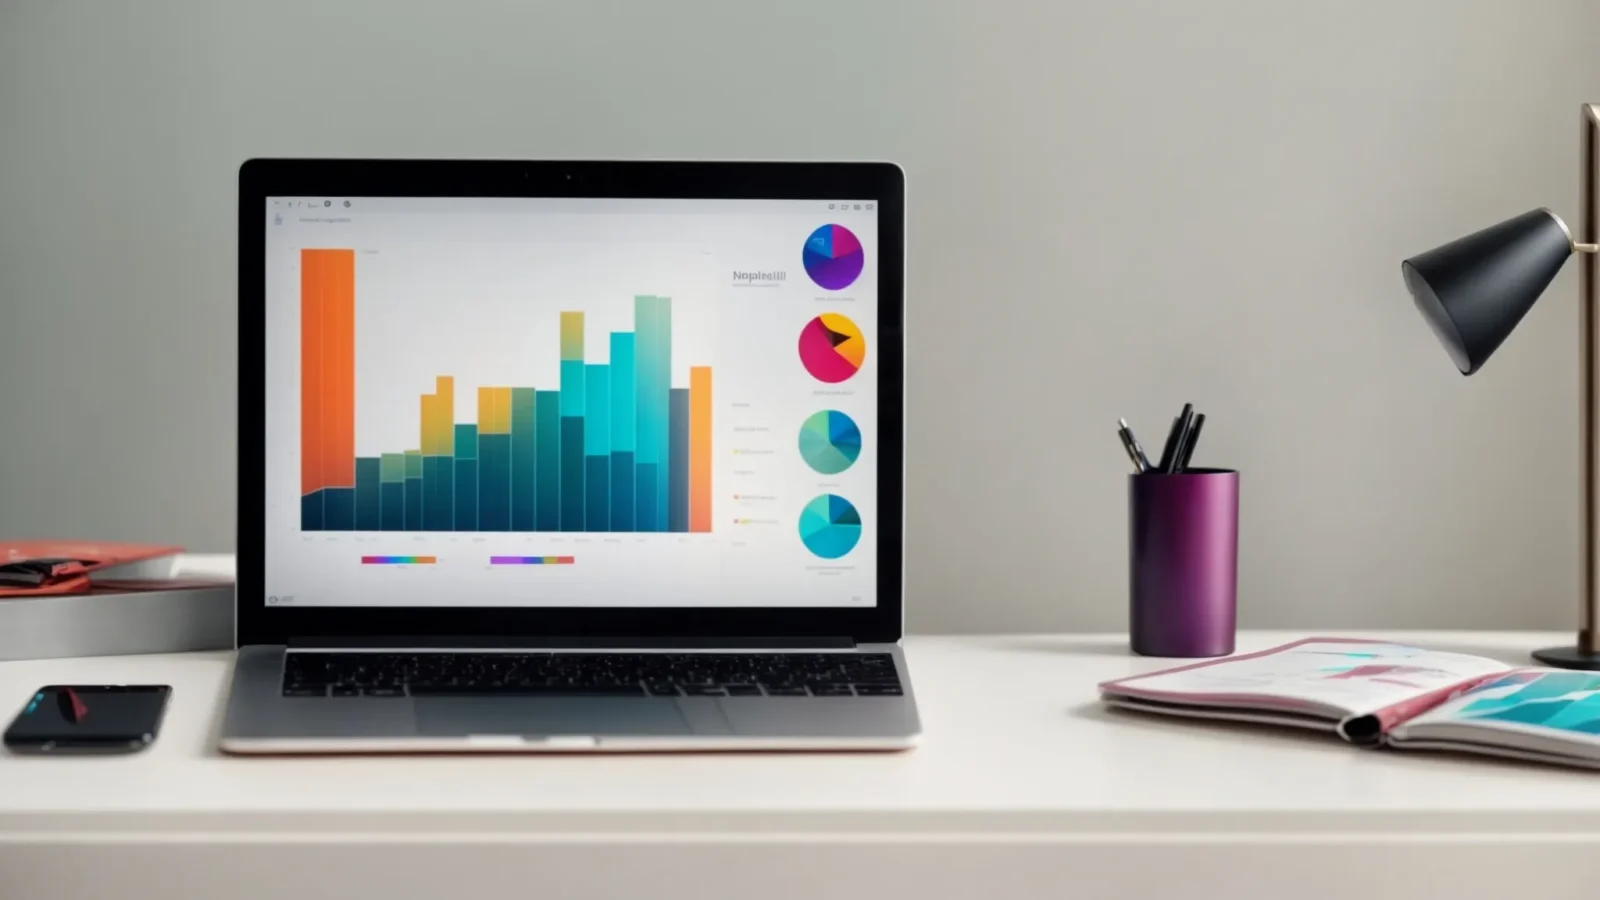 a laptop displaying colorful graphs and charts on the screen while sitting on a minimalist desk.